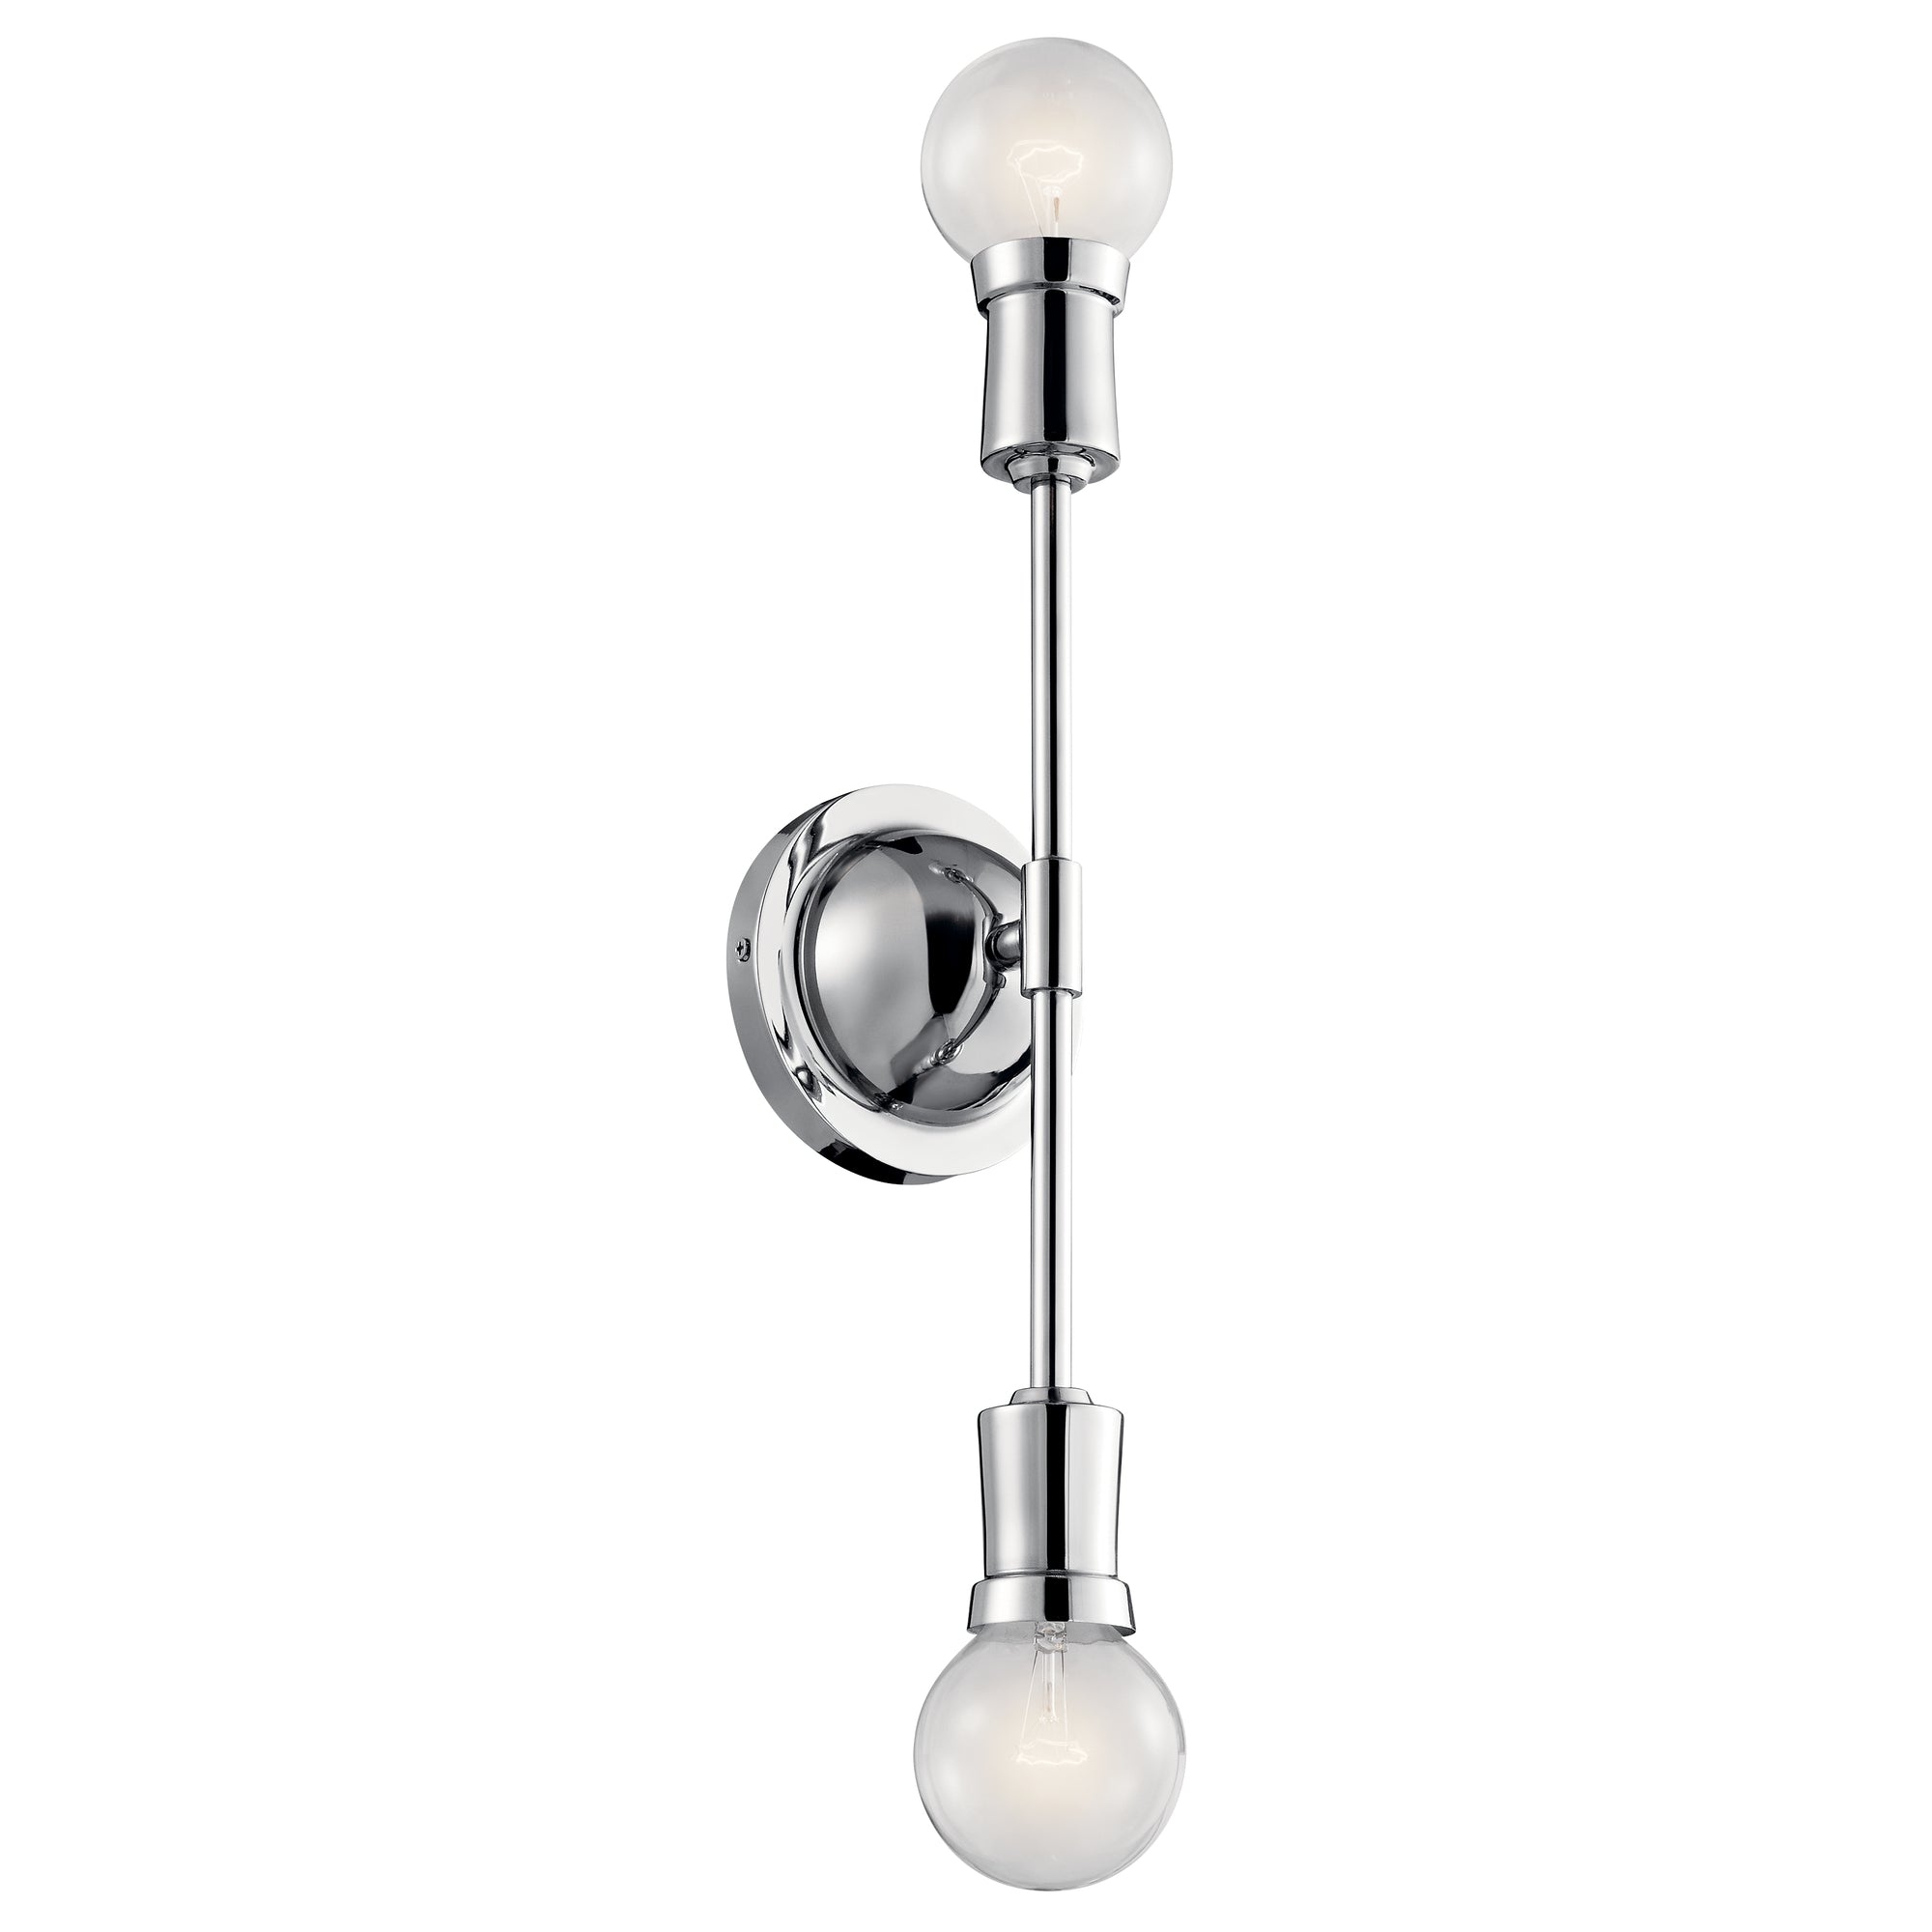 ARMSTRONG Murale Chrome - 43195CH | KICHLER